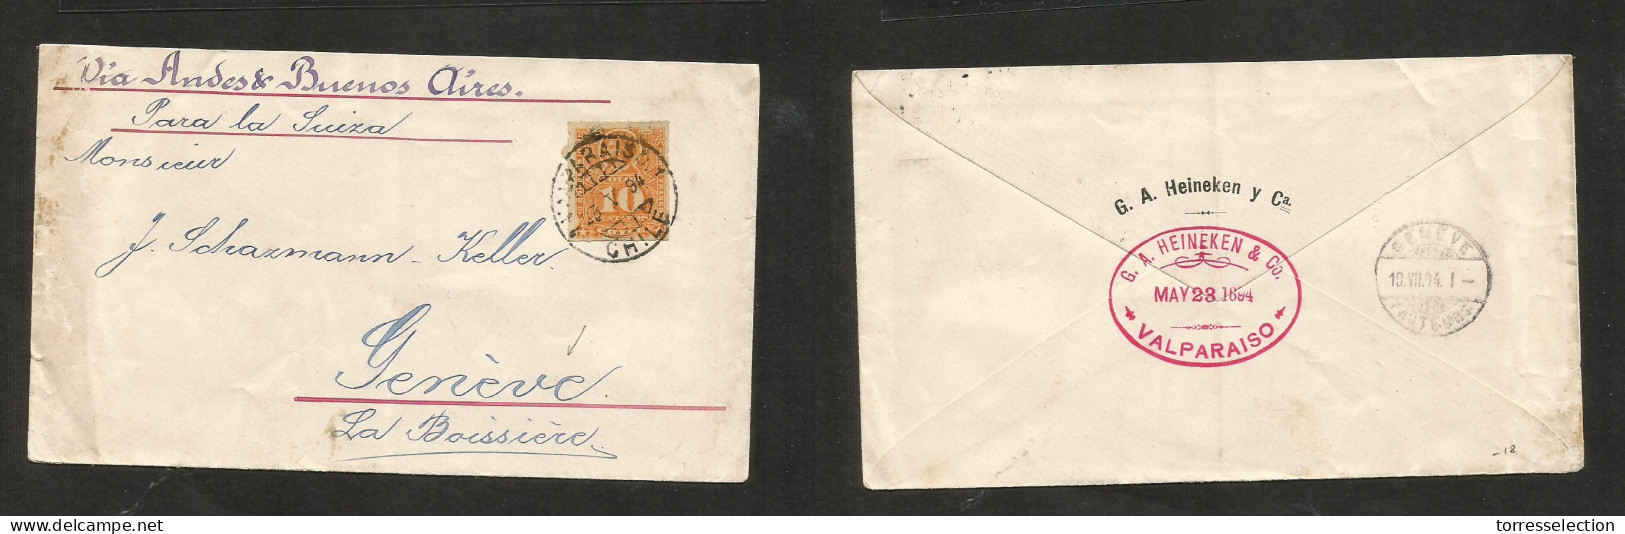 CHILE. 1894 (23 May) Valp - Switzerland, Geneve (10 July) Via Andes - Buenos Aires. Fkd Env 10c Orange Perce, Tied Cds.  - Chili